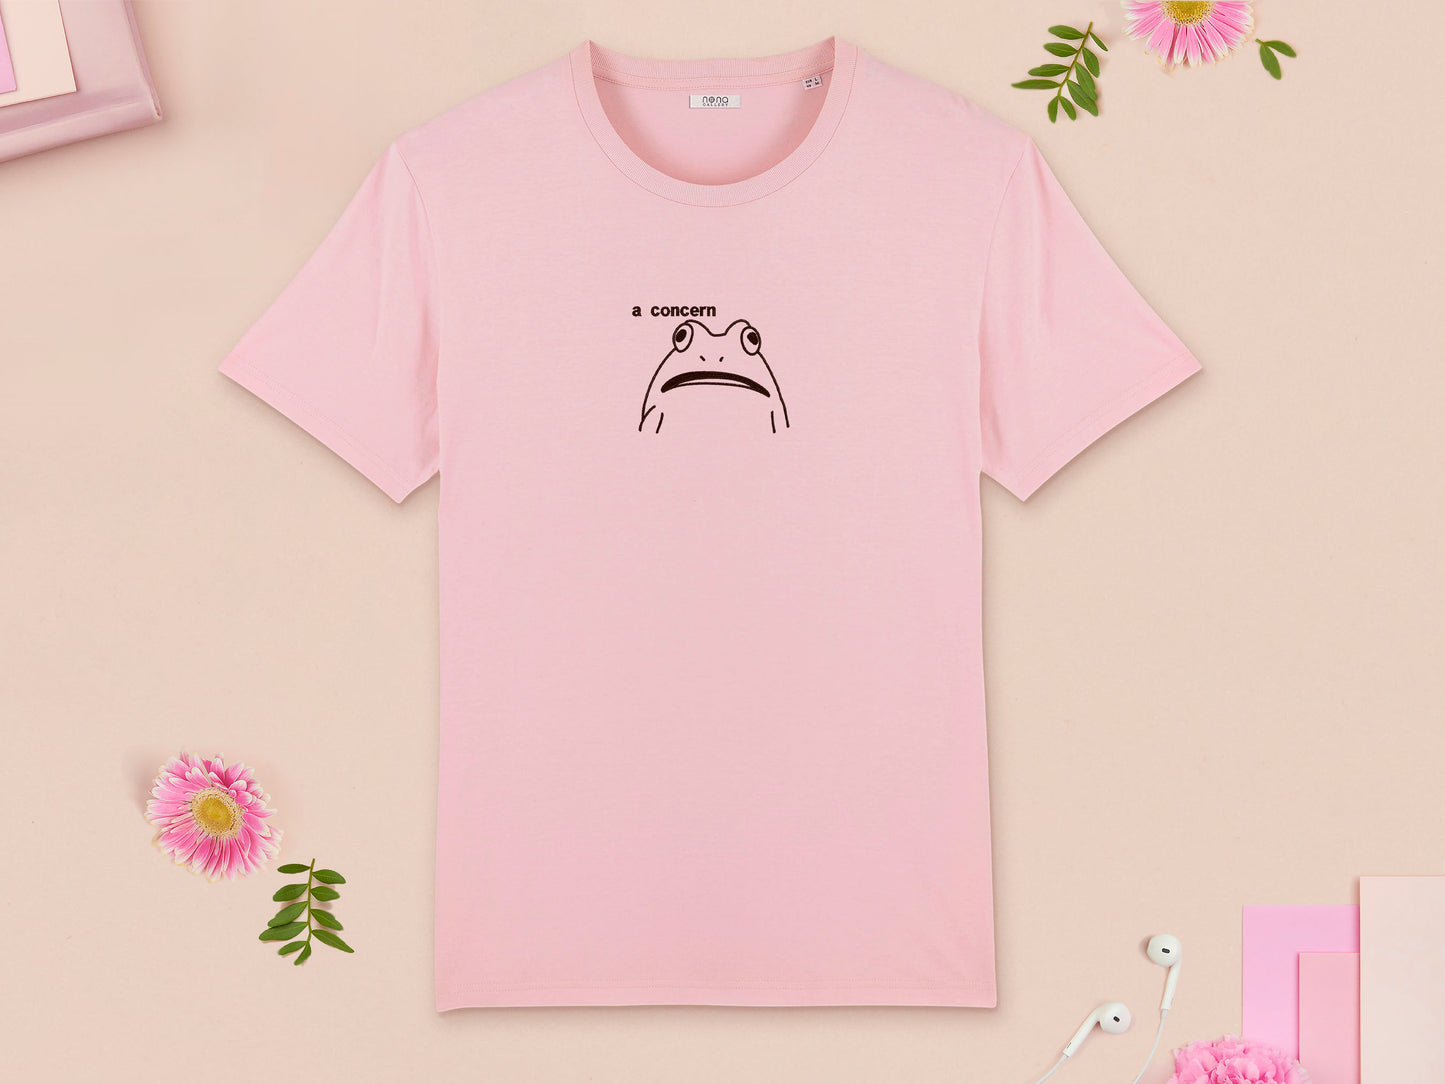 A pink crew neck short sleeve t-shirt, with an embroidered brown thread design of cute confused looking frog with the text a concern.